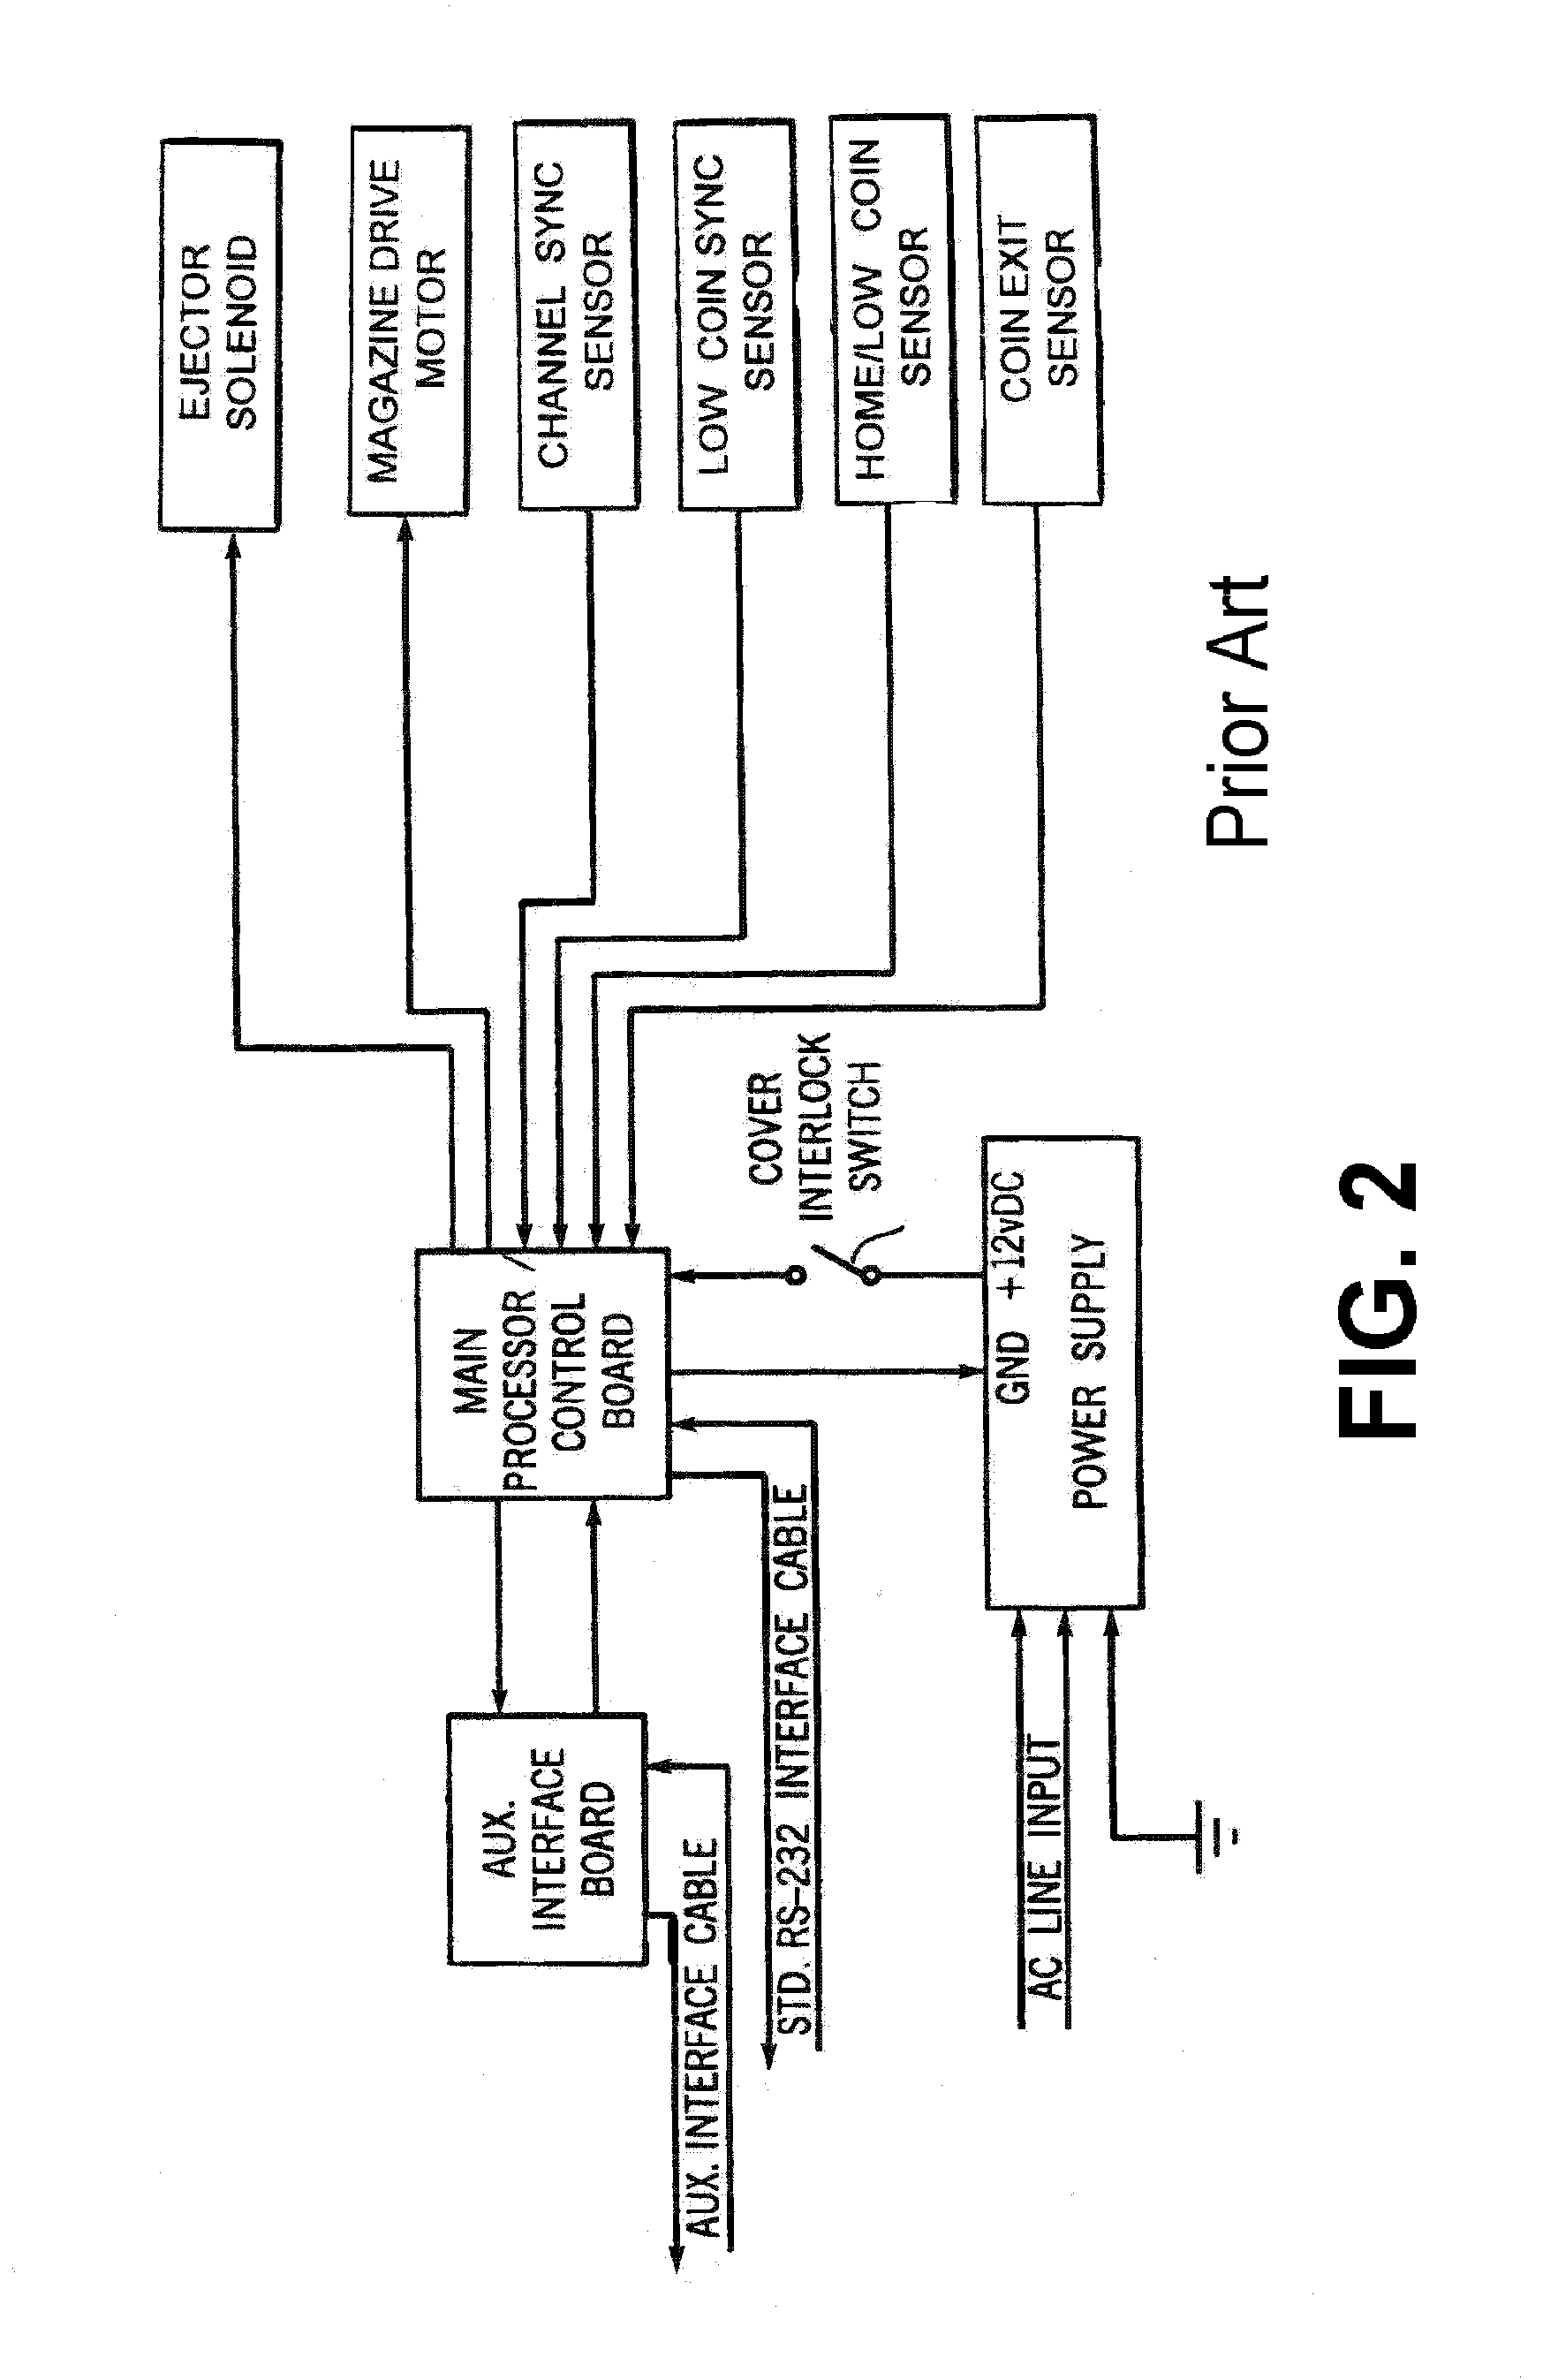 System or Method for Storing Credit on a Value Card or Cellular Phone Rather Than Accepting Coin Change